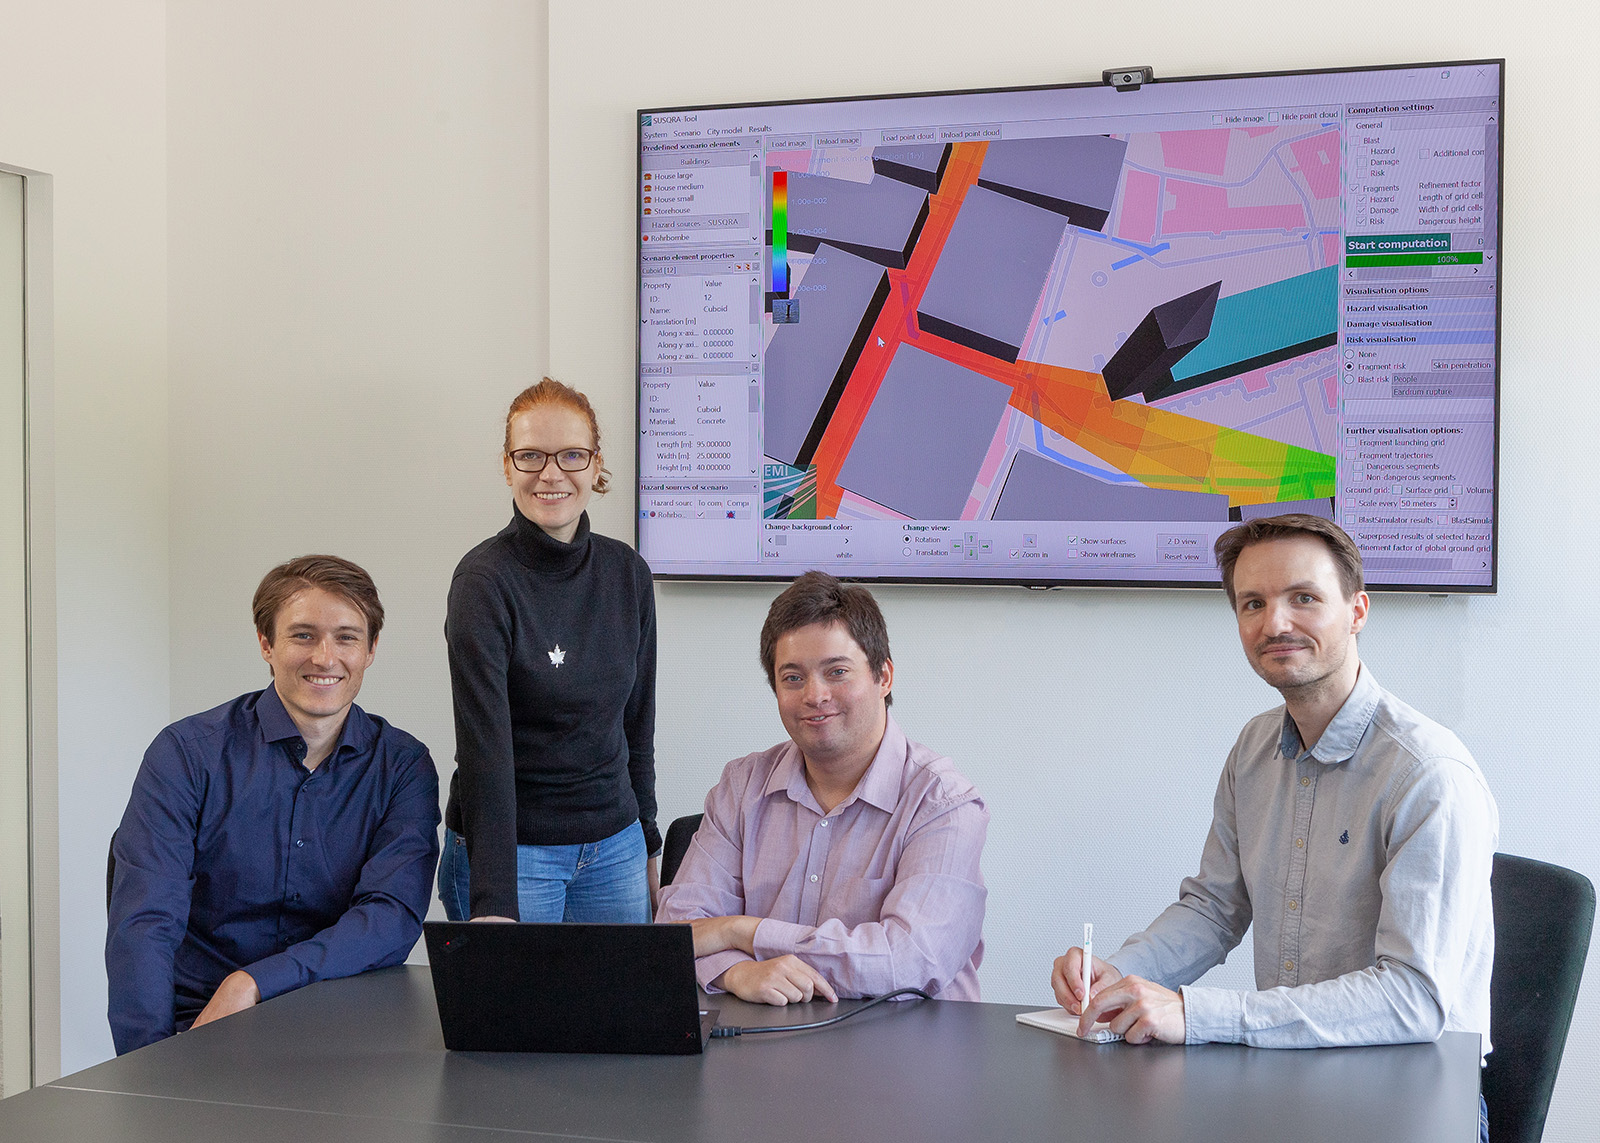 Dr. Katharina Ross (second from left) and her fellow researchers from Fraunhofer EMI (from left to right: Andreas Weber, Andreas Frorath and Dr. Christoph Brockt) are now investigating the potential of the SUSQRA software tool.